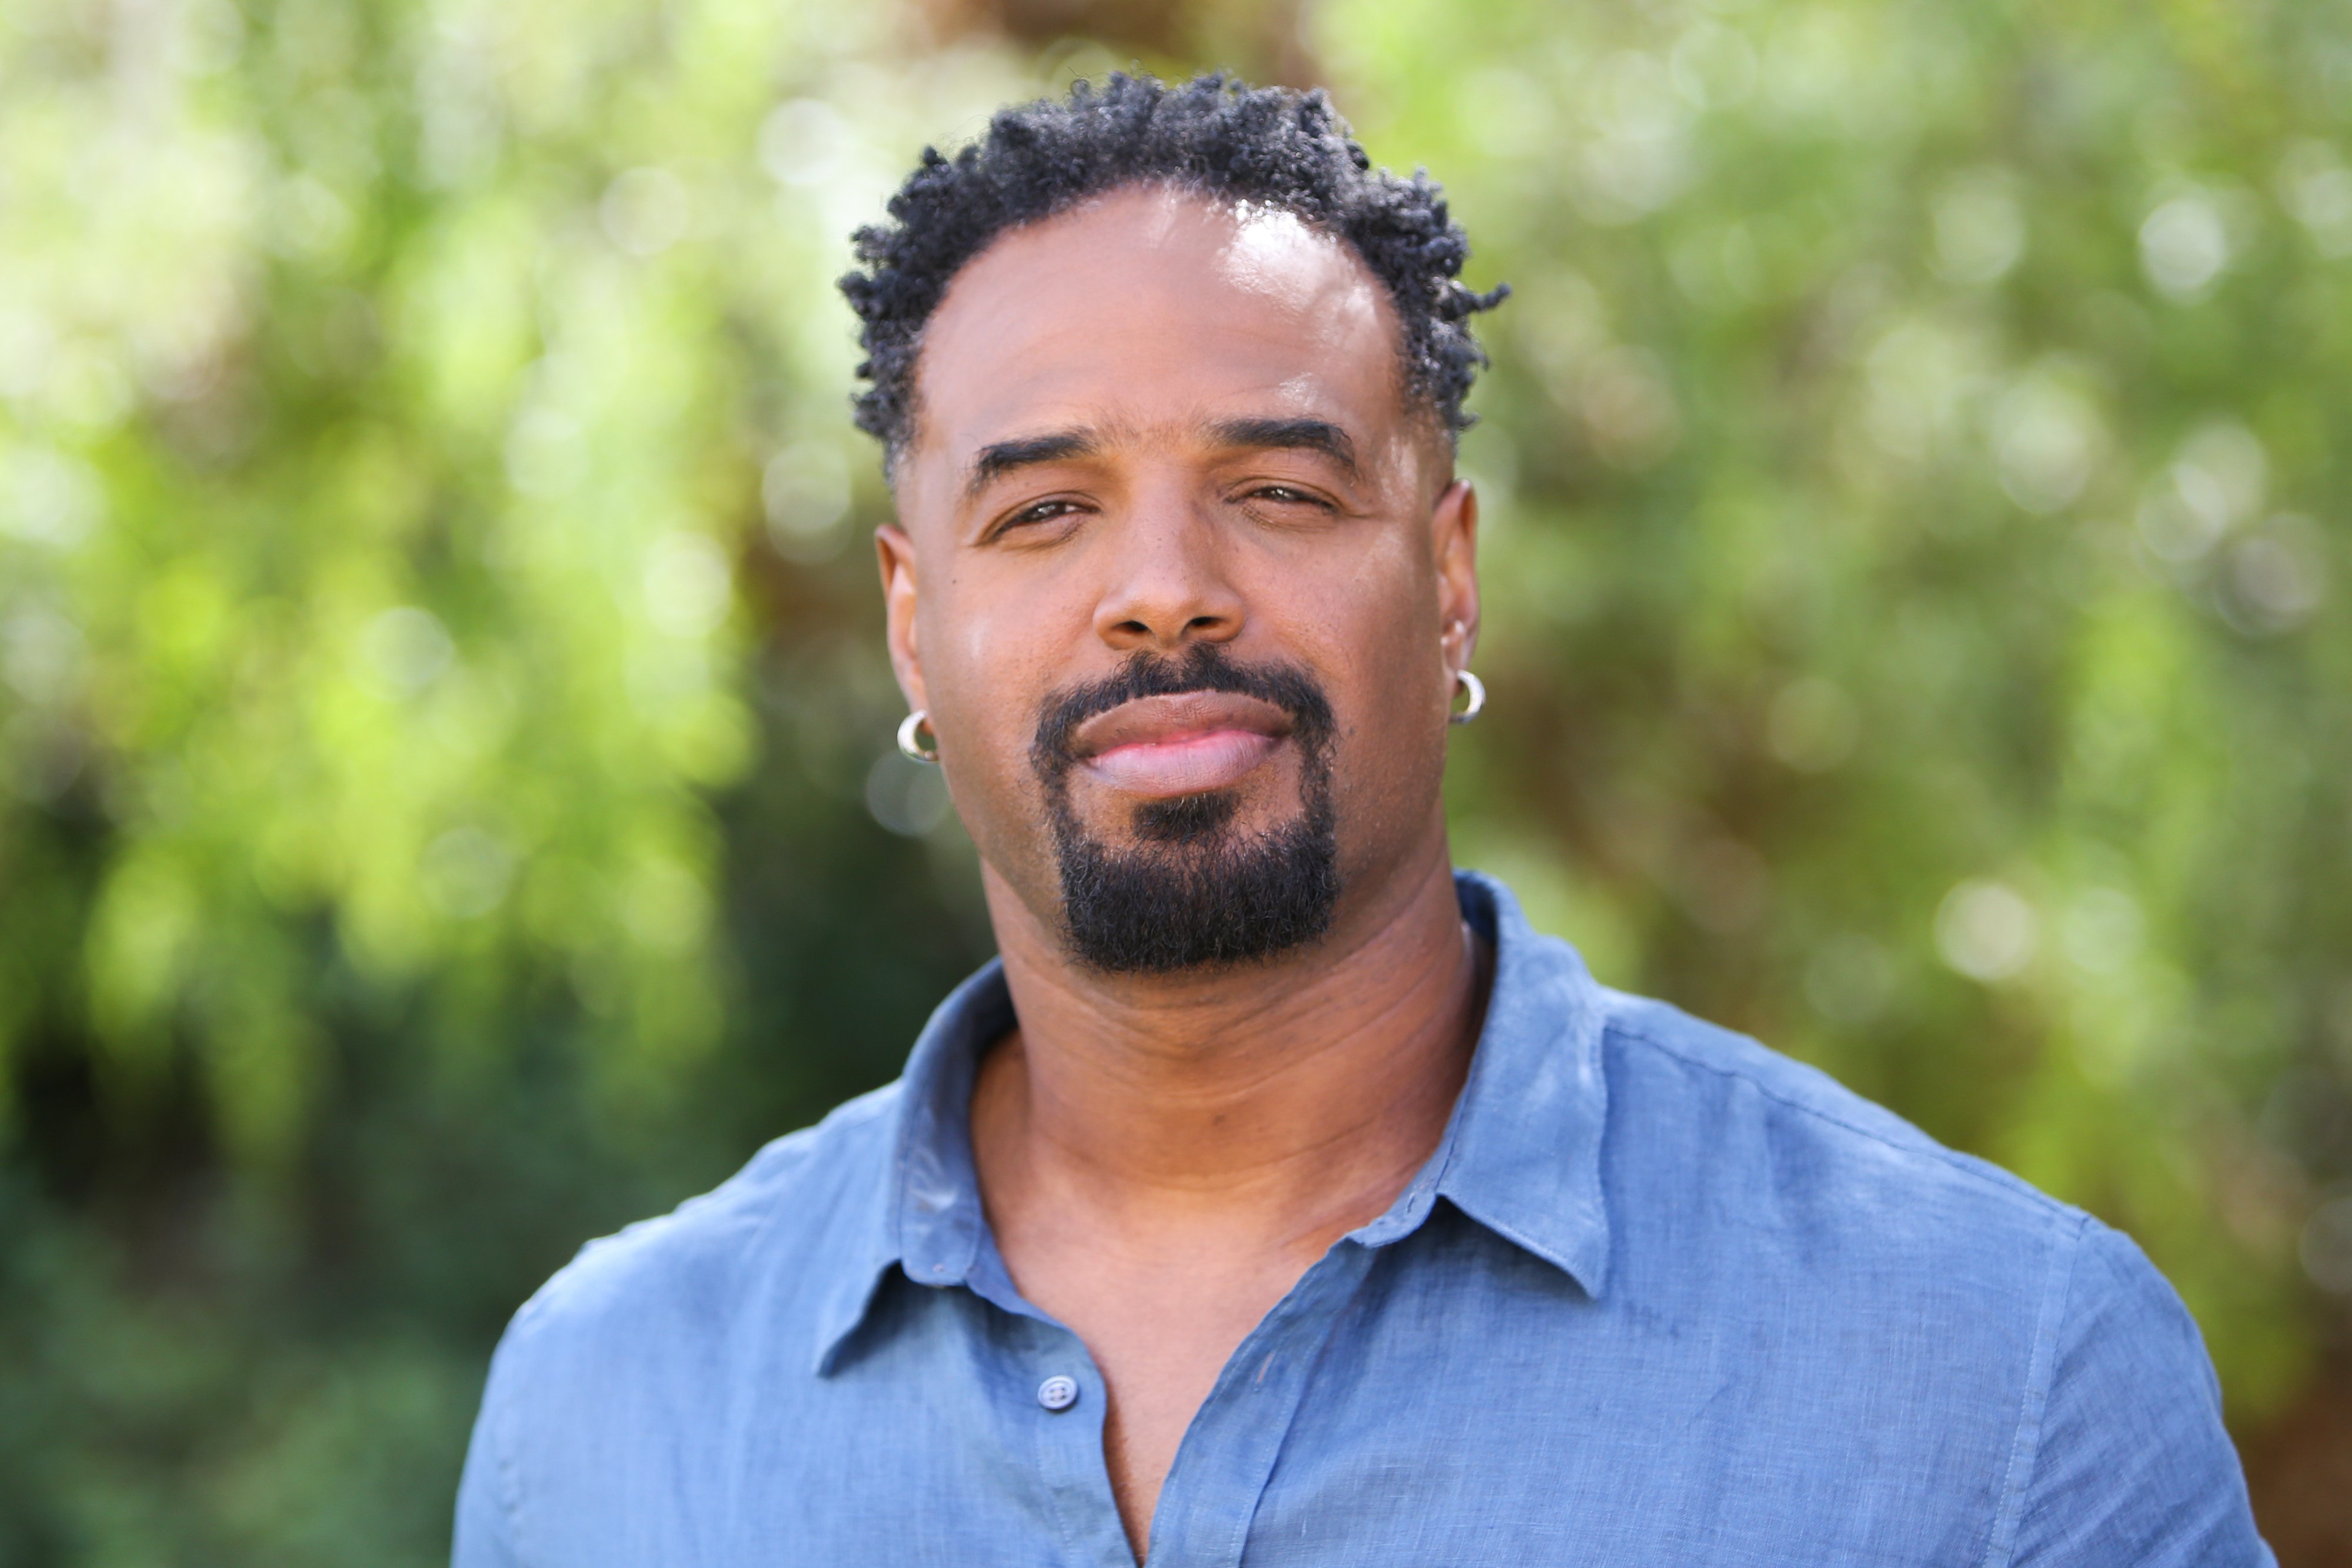 Shawn Wayans visits Hallmark Channel's "Home & Family" at Universal Studios Hollywood on September 11, 2019 | Photo: Getty Images